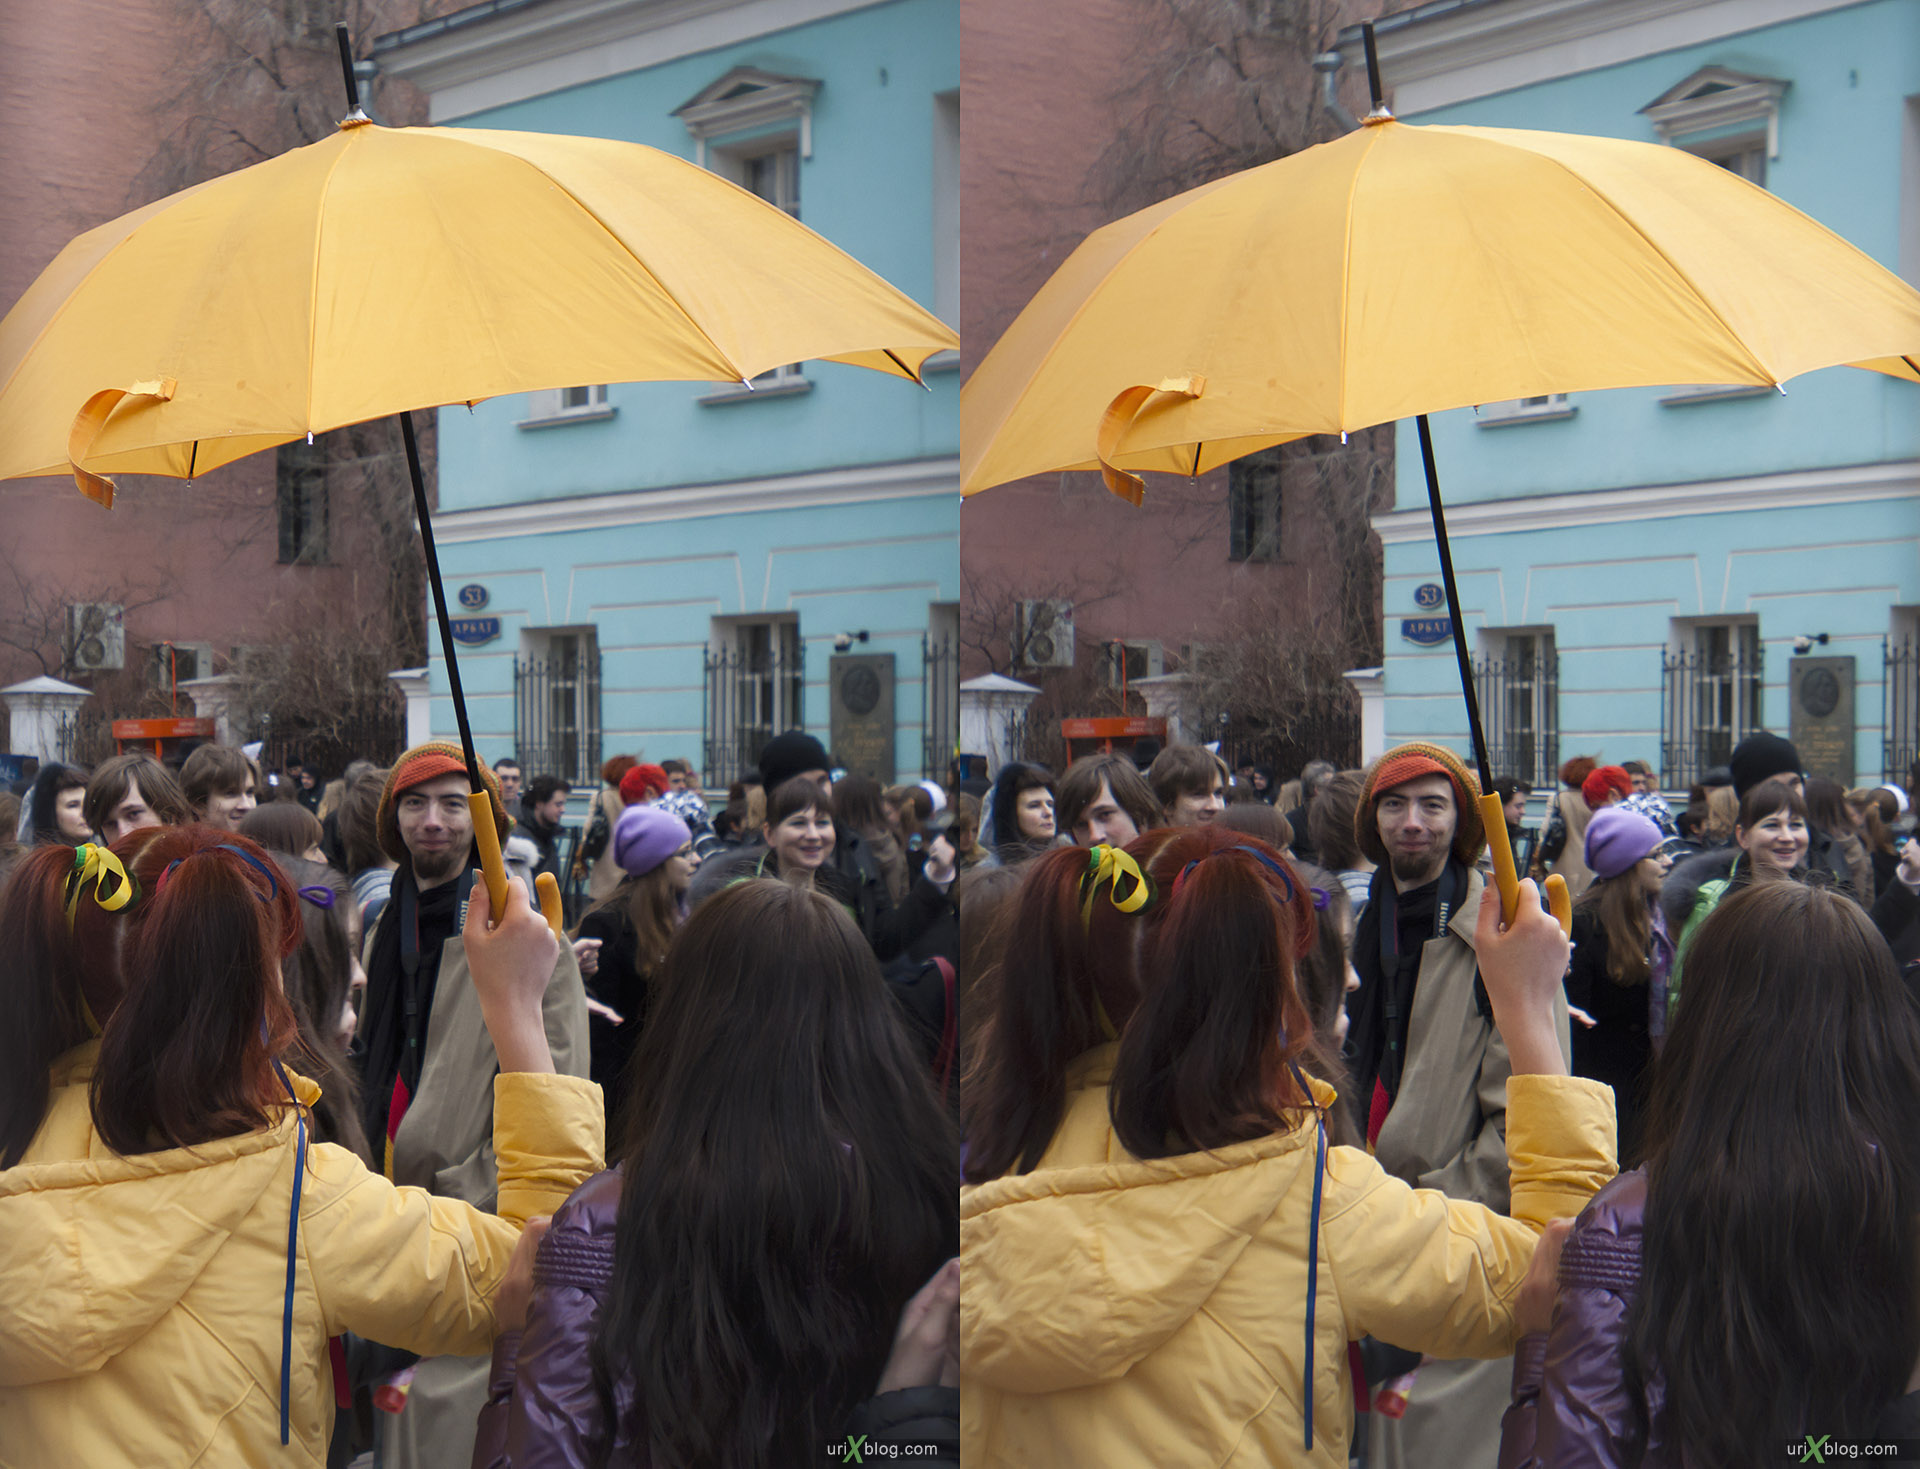 2011 Moscow, Dreamflash, Old Arbat st., Москва, Дримфлеш, Старый Арбат, Shot with Canon 5D mark 2, 3D, stereo, cross-eyed, стерео, стереопара, Loreo 3D lens in a cap